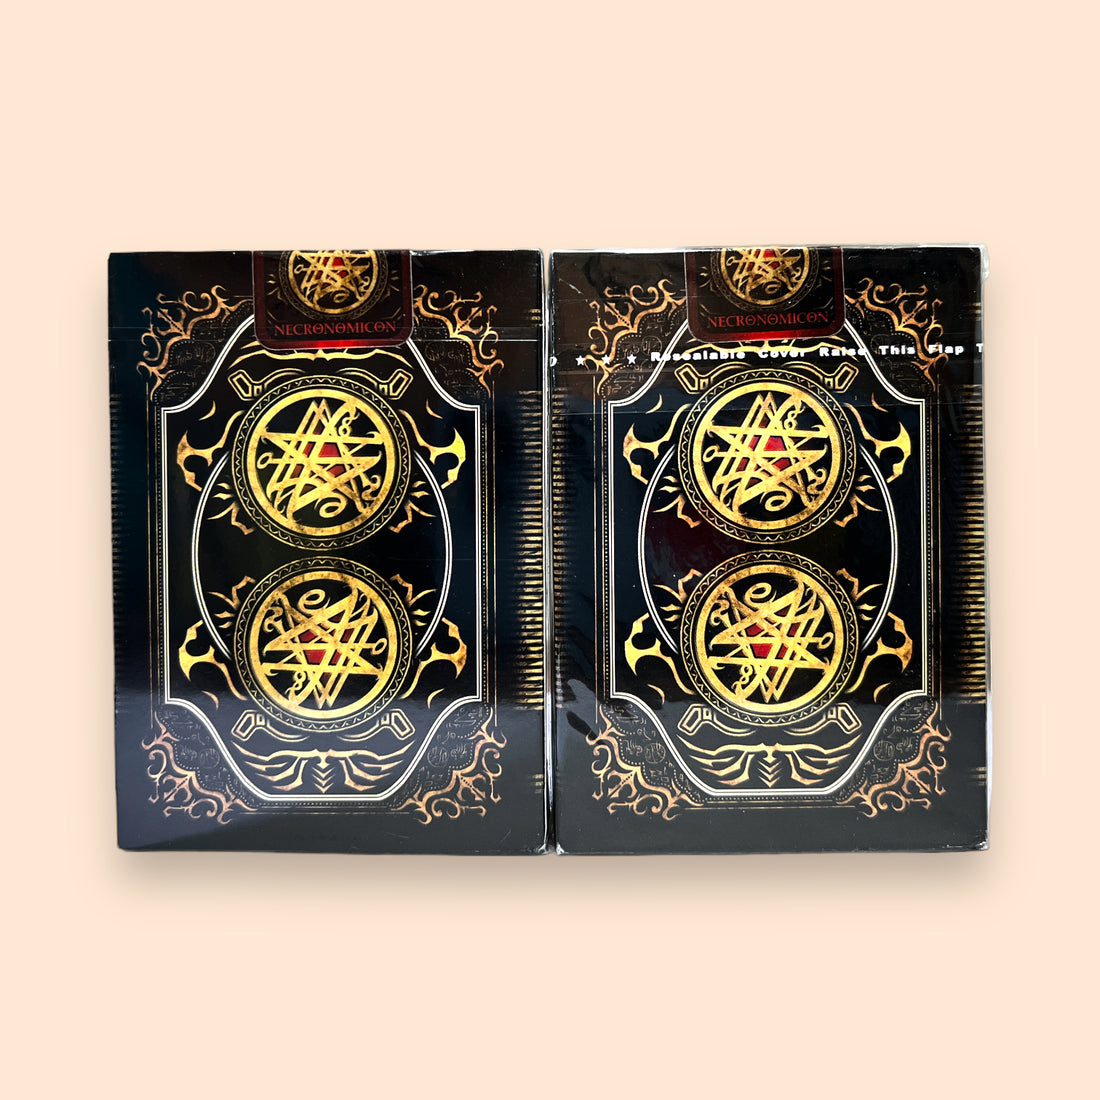 Three Kingdoms Tarot Poker Card Protector Sleeves 100 Piece Set 4 Sizes ▻   ▻ Free Shipping ▻ Up to 70% OFF